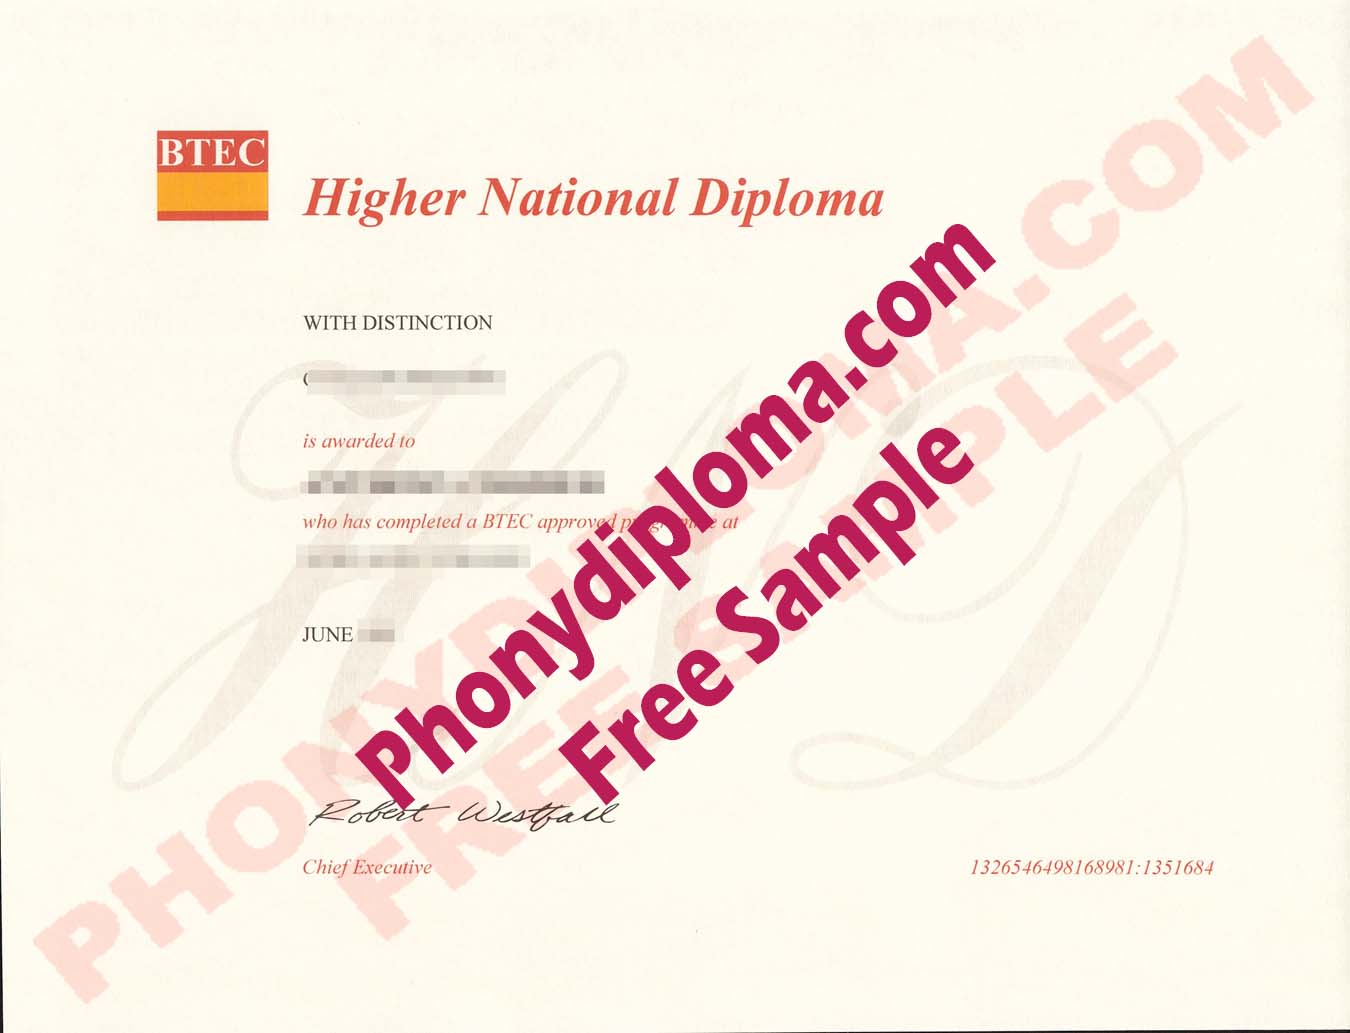 Btec Higher National Diploma Newcastle Free Sample From Phonydiploma